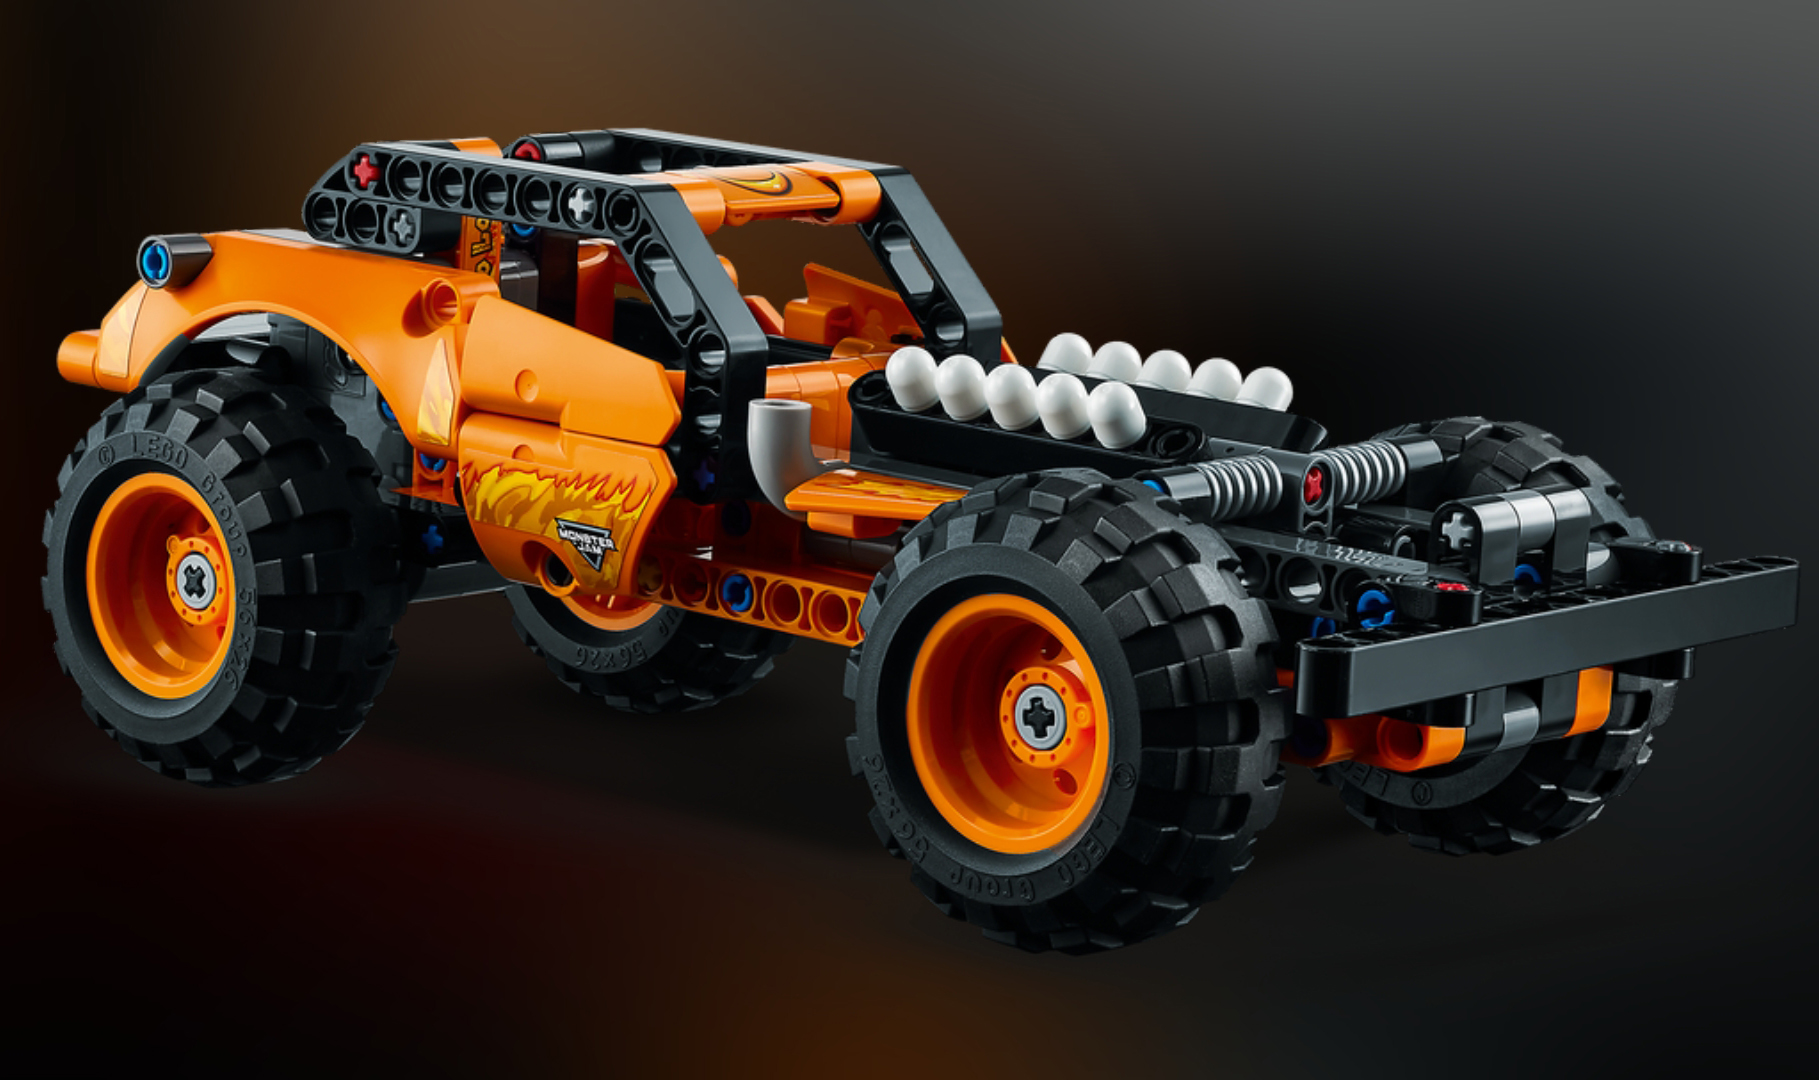 RacingBrick on Twitter: "Good Morning apparently today we get a sneak peek of some 2022 LEGO Technic Here's the first one, the 42135 Monster Jam El Toro Loco! has